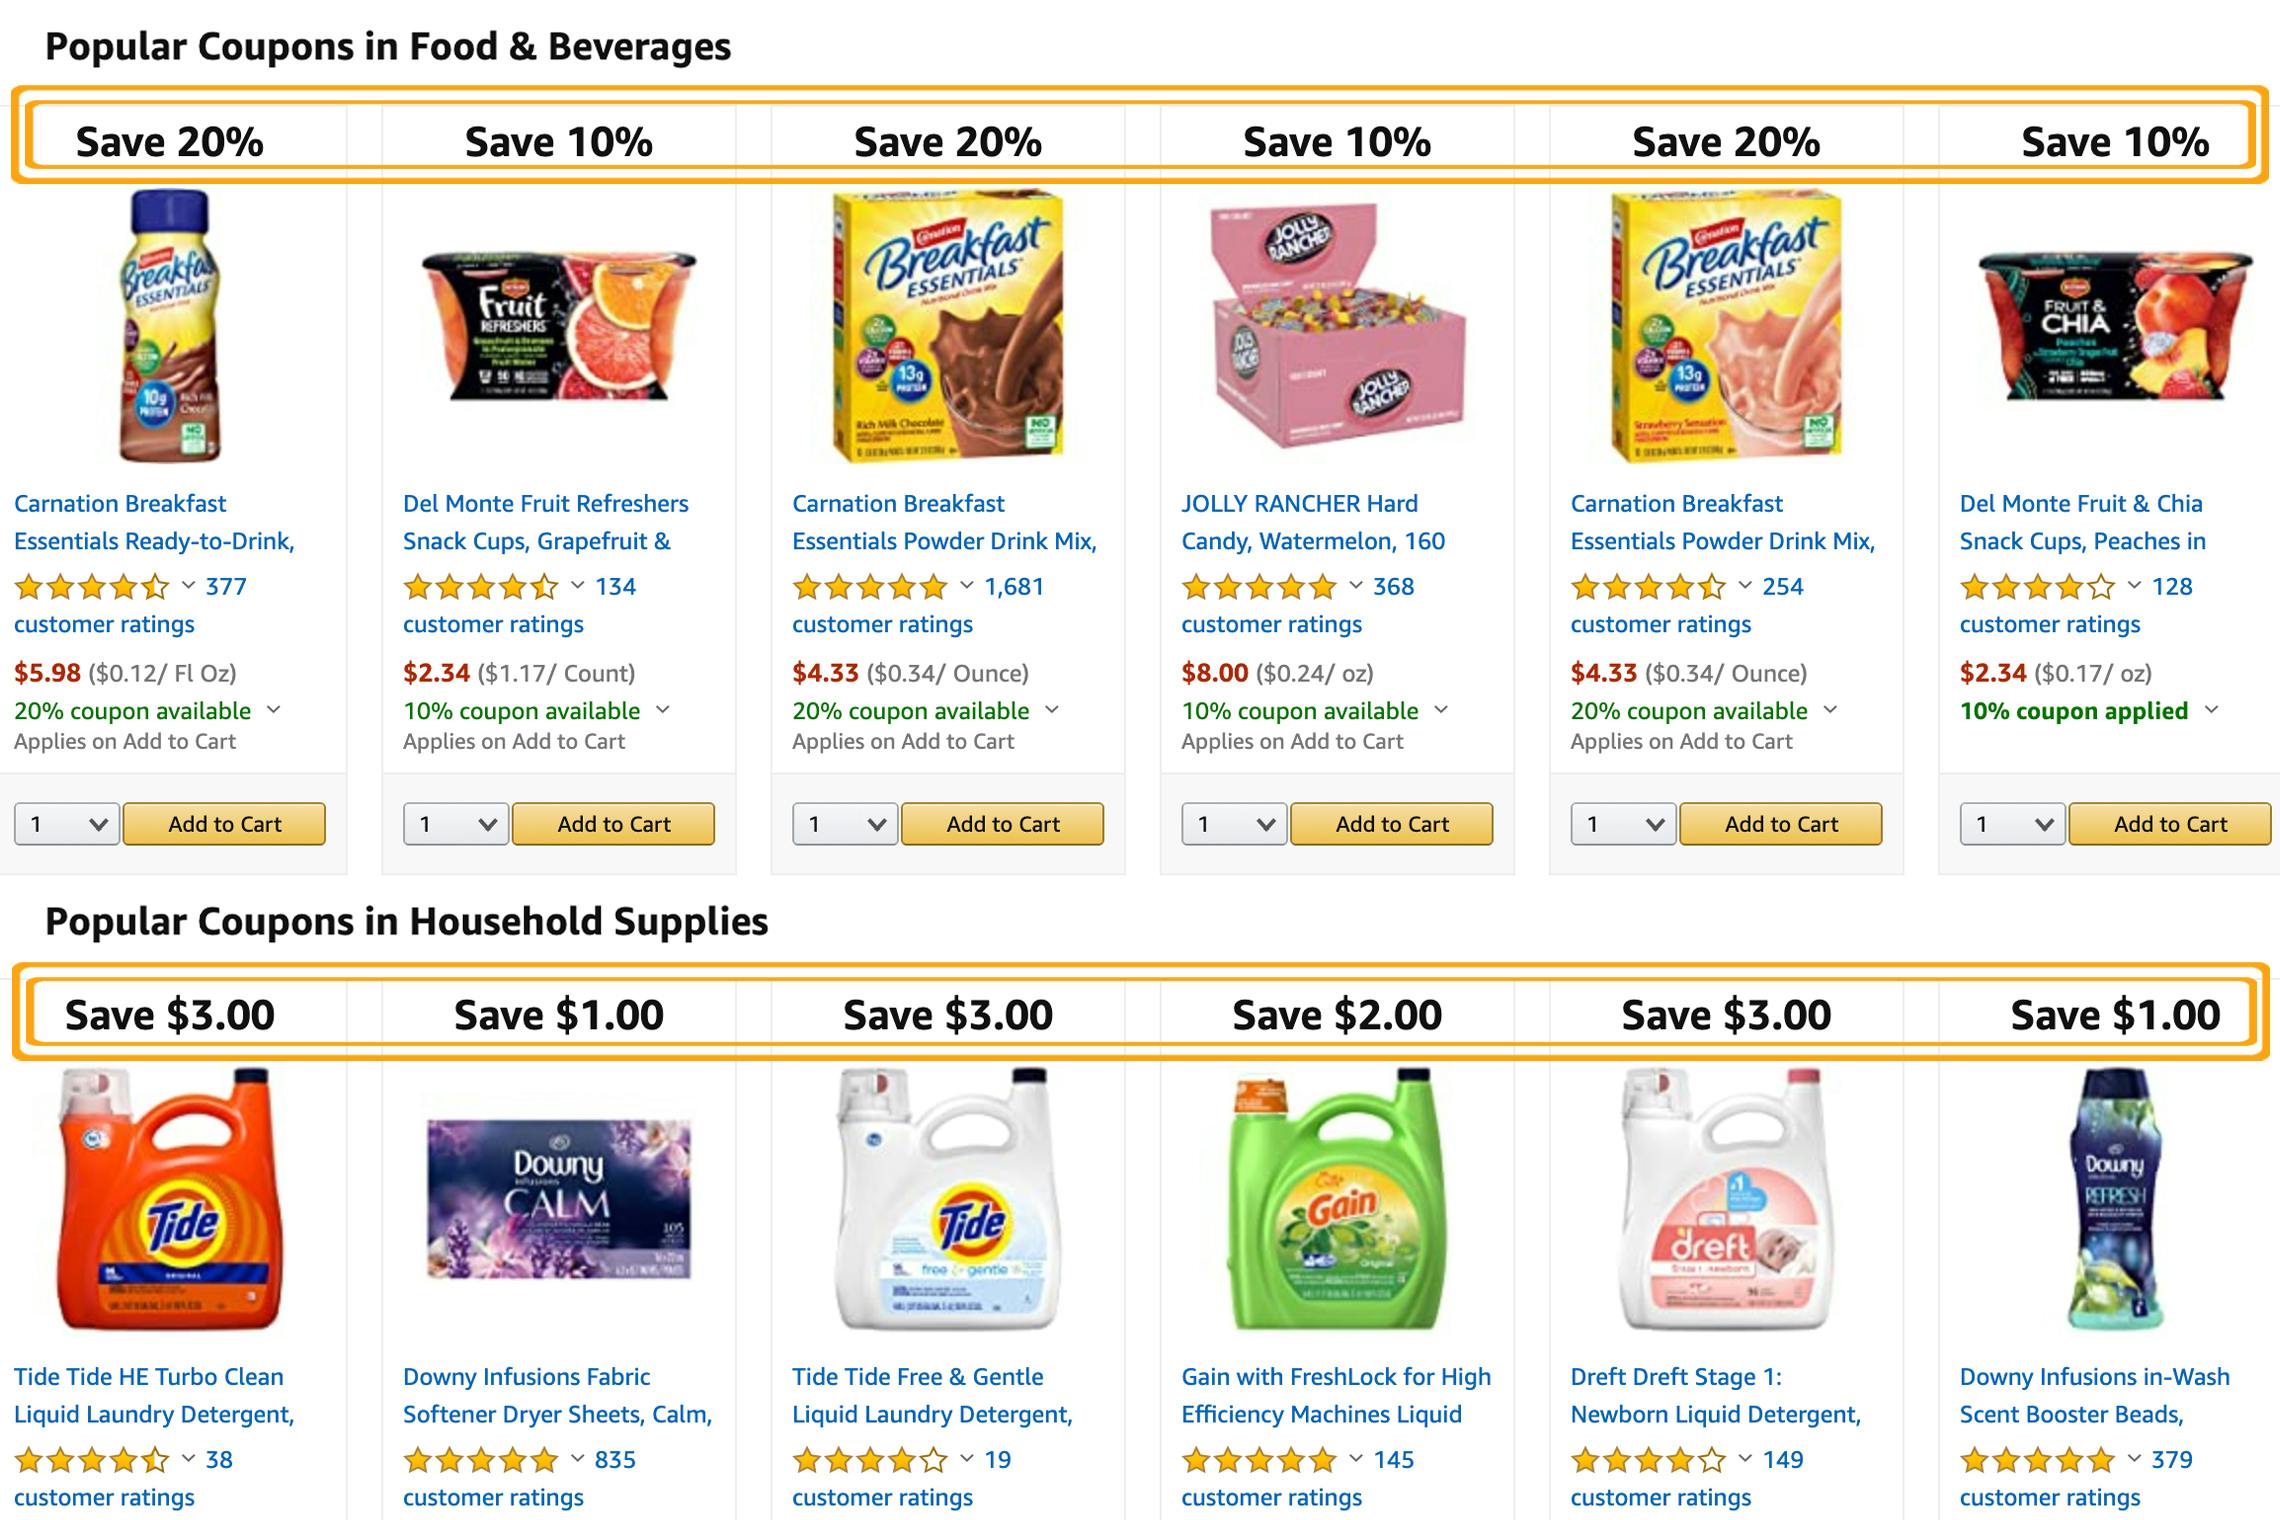 A screenshot of an Amazon website page with several popular coupons listed.